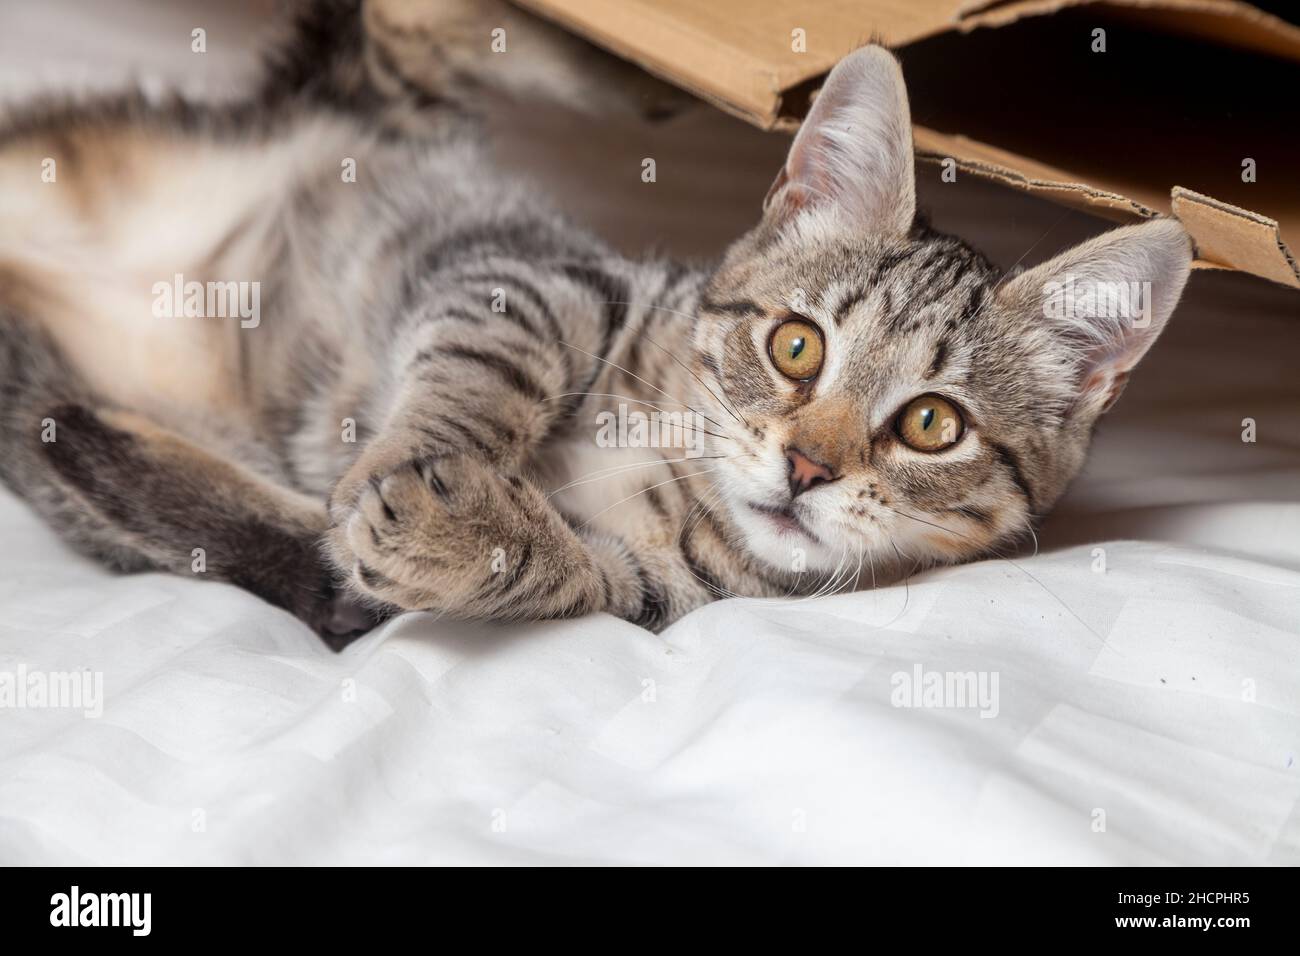 A cute six month old kitten lying on a bed Stock Photo